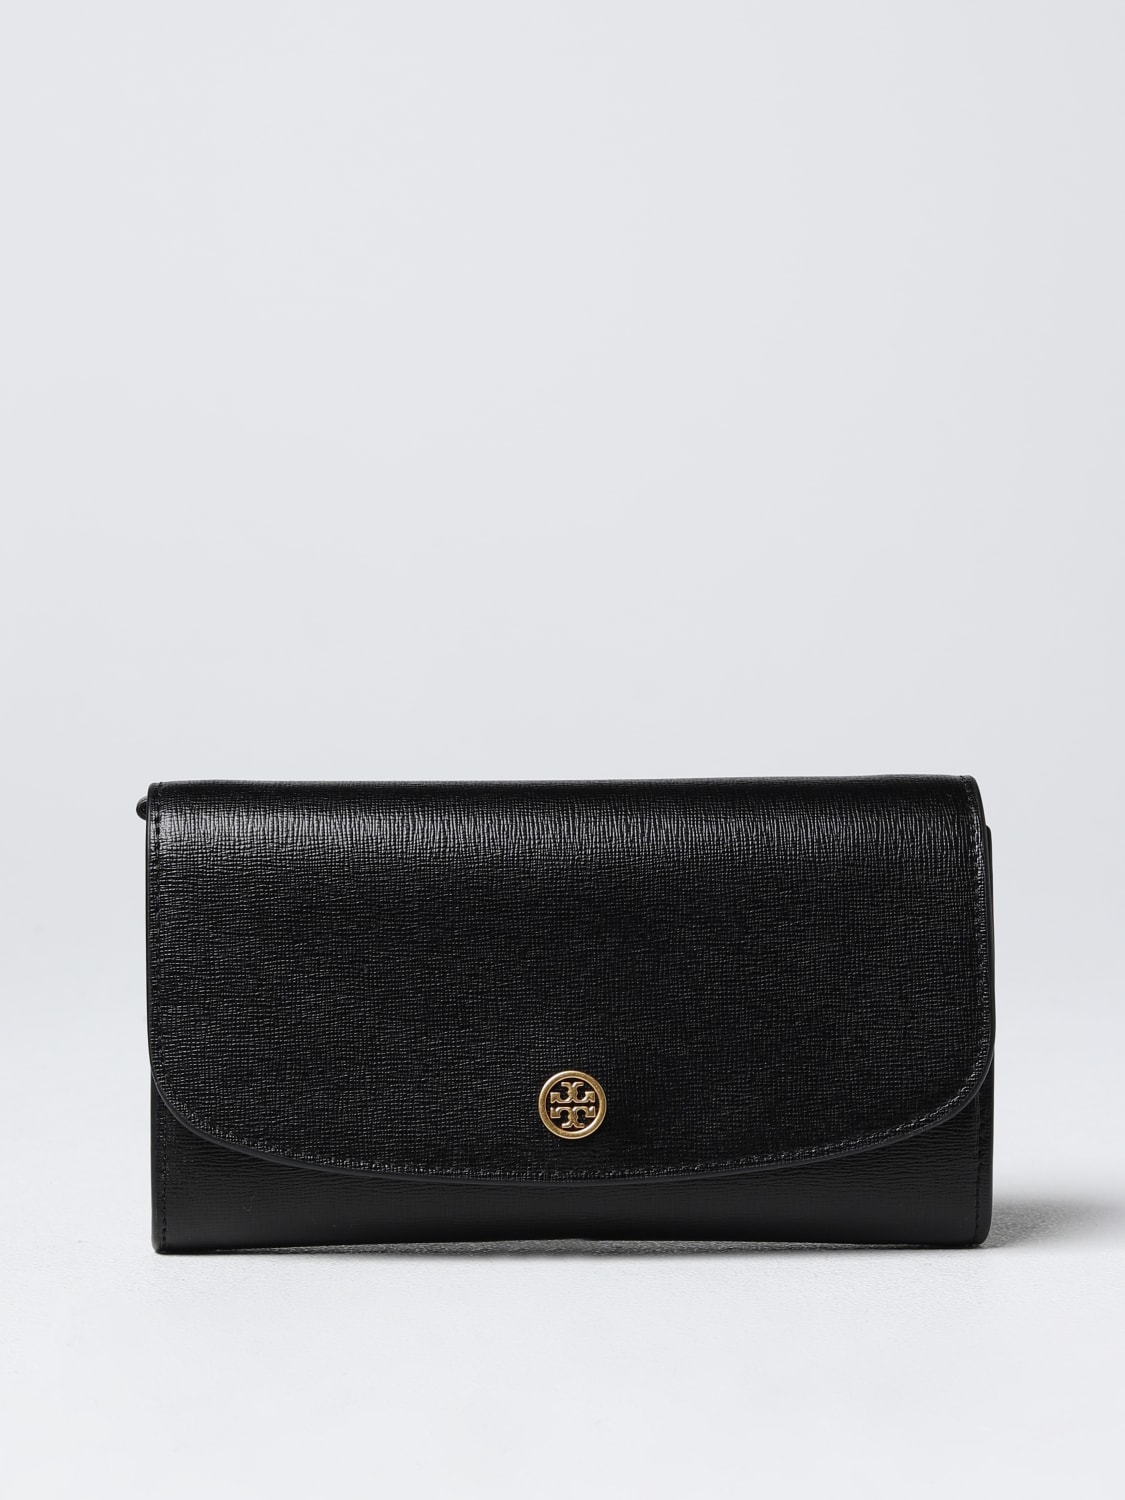 Tory Burch Womens 144673 Saffiano Leather Emerson Zip Card Case Wallet,  (001 Black)